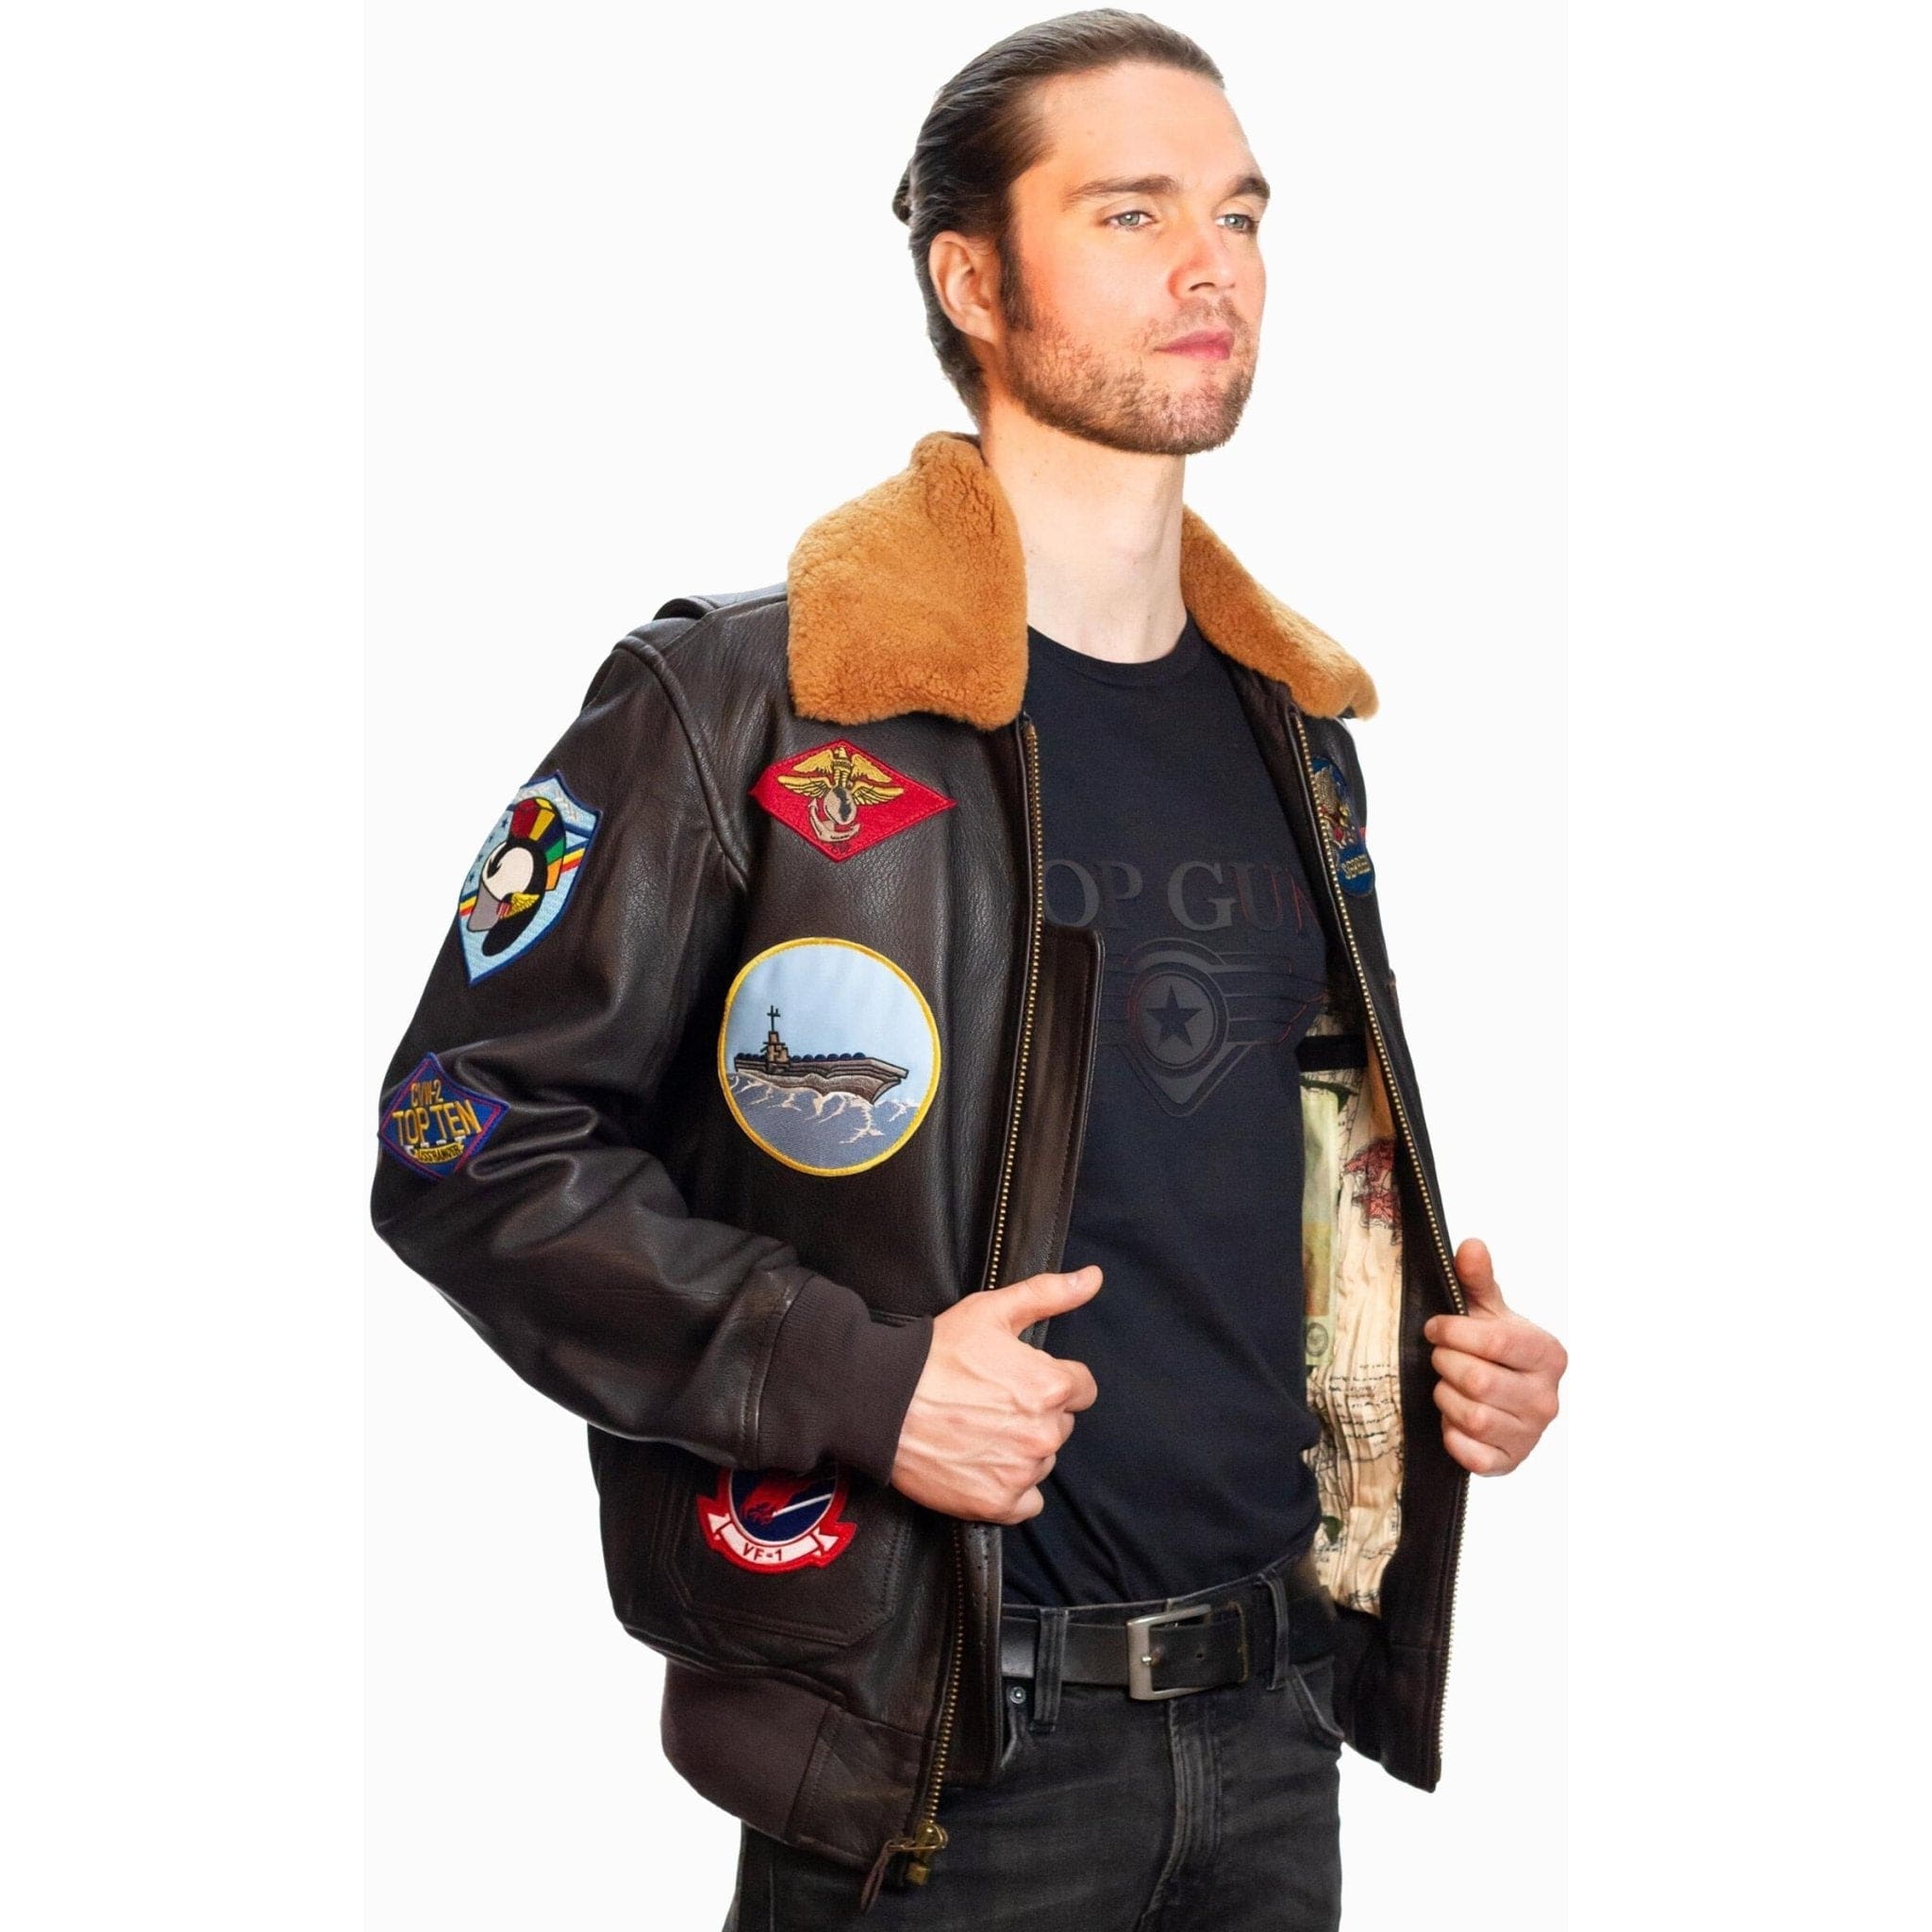 Top Gun® Official G-1 Leather Jacket with Patches